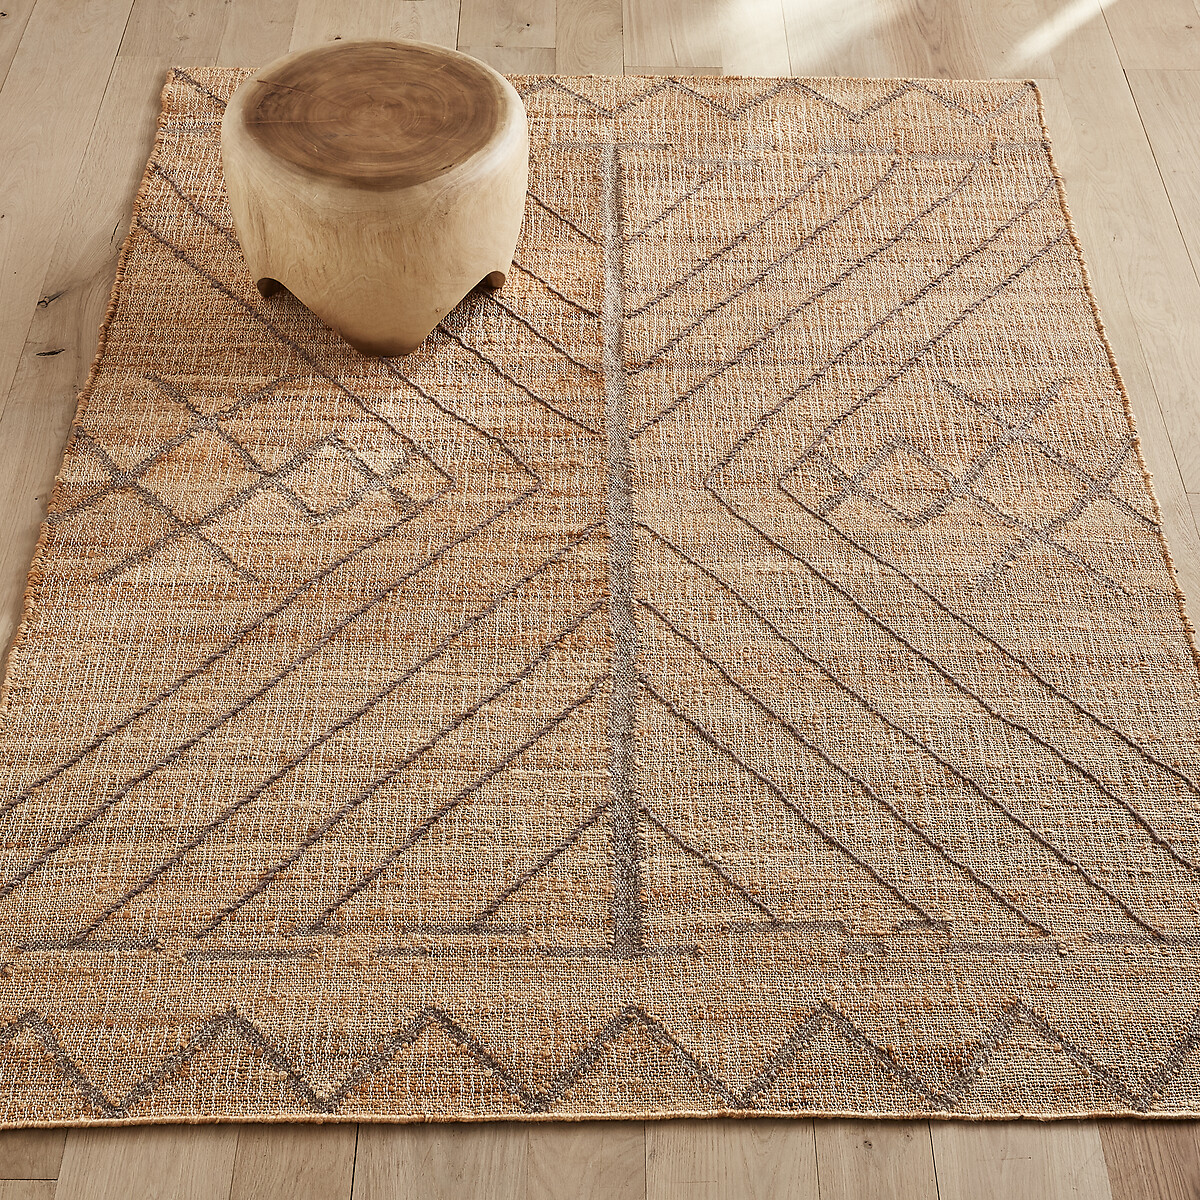 Navala textured hand woven jute rug natural/charcoal Am.Pm